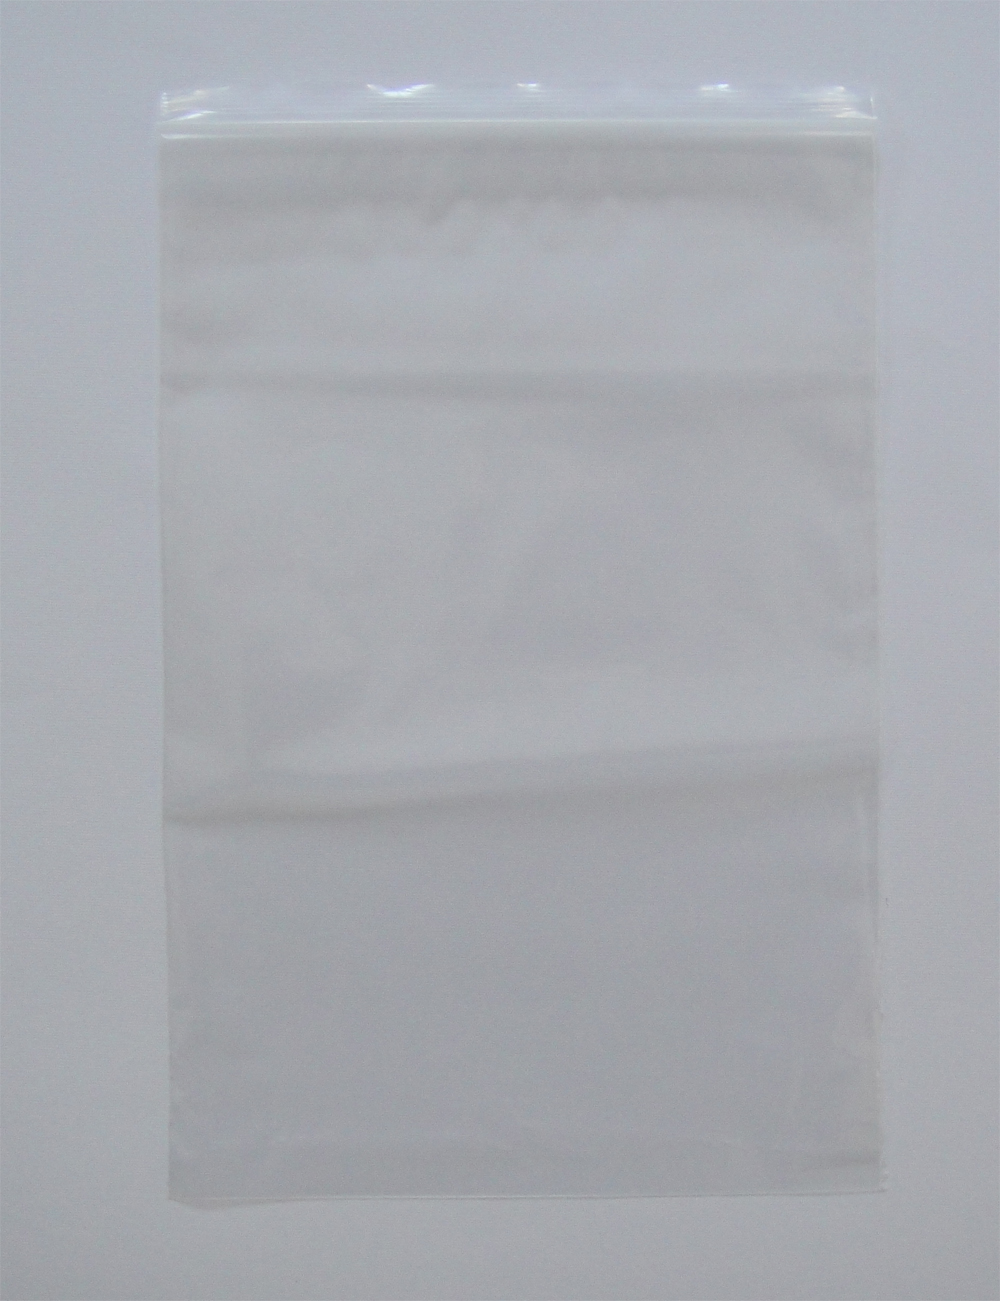 Buy Airtight plastic bags from Poly bags Direct LEICESTER